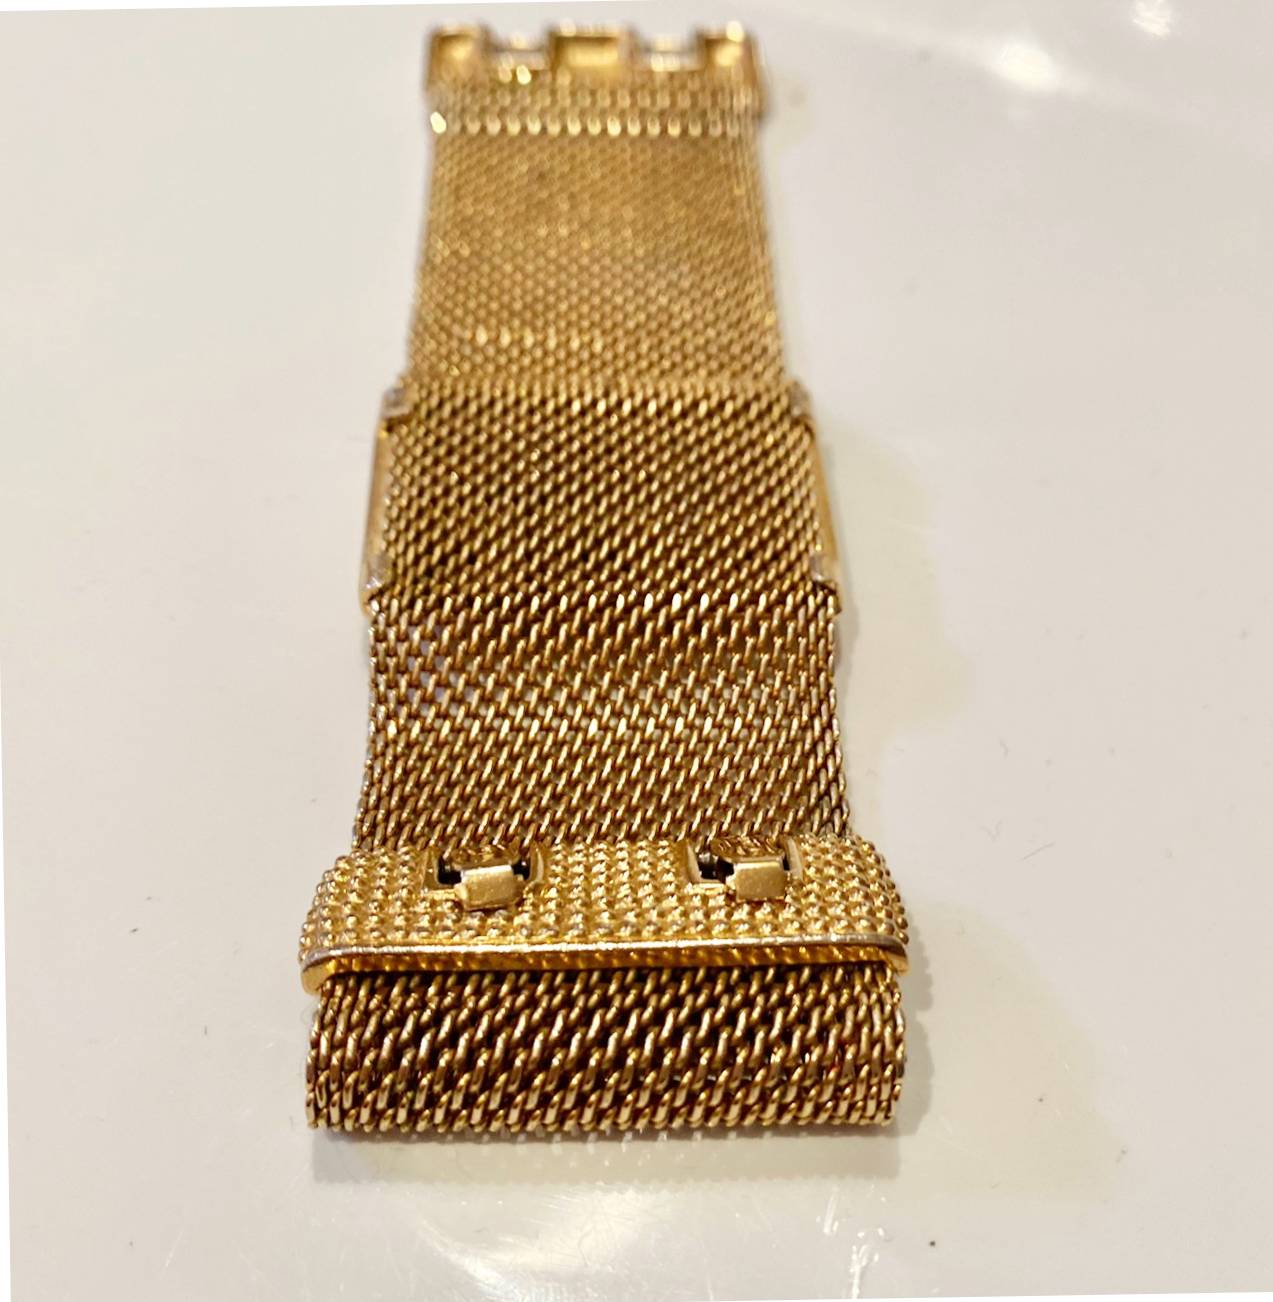 1980s Guy Laroche Gold Plated Mesh Crystal Bangle - style - CHNGR